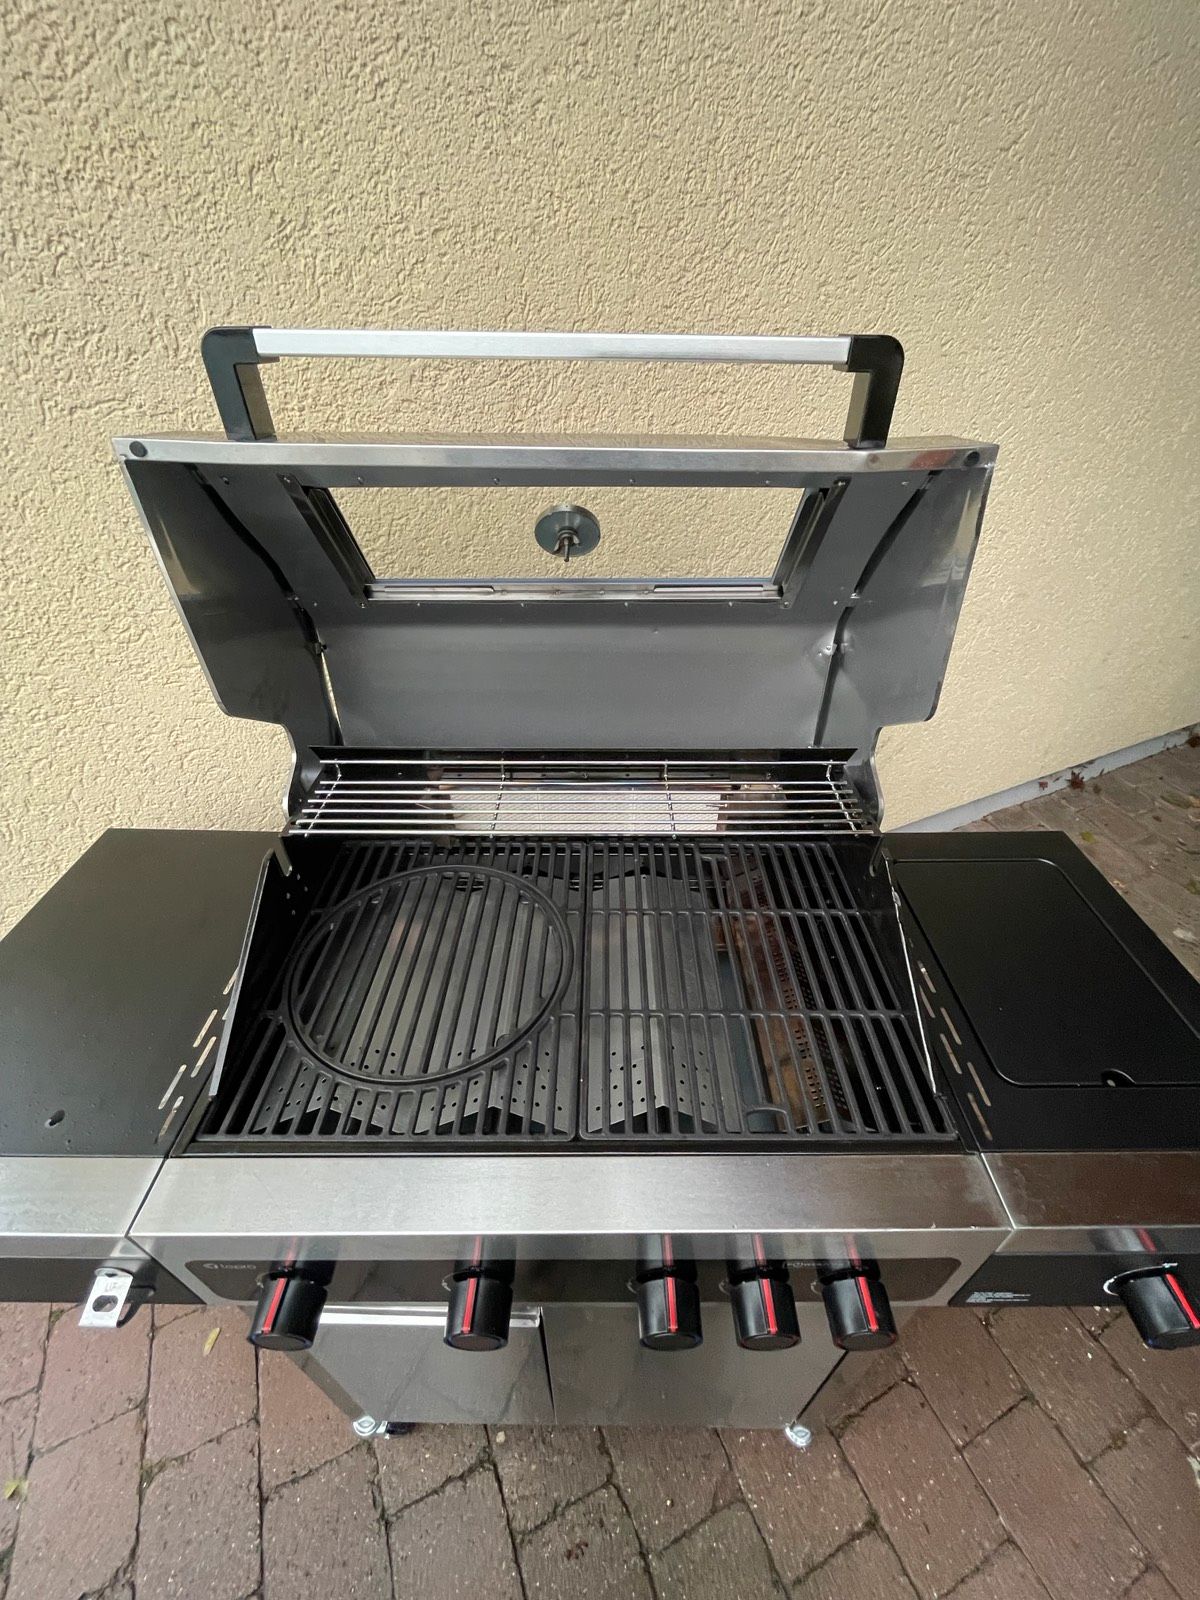 tepro Keansburg 3 Special Edition Gasgrill Test